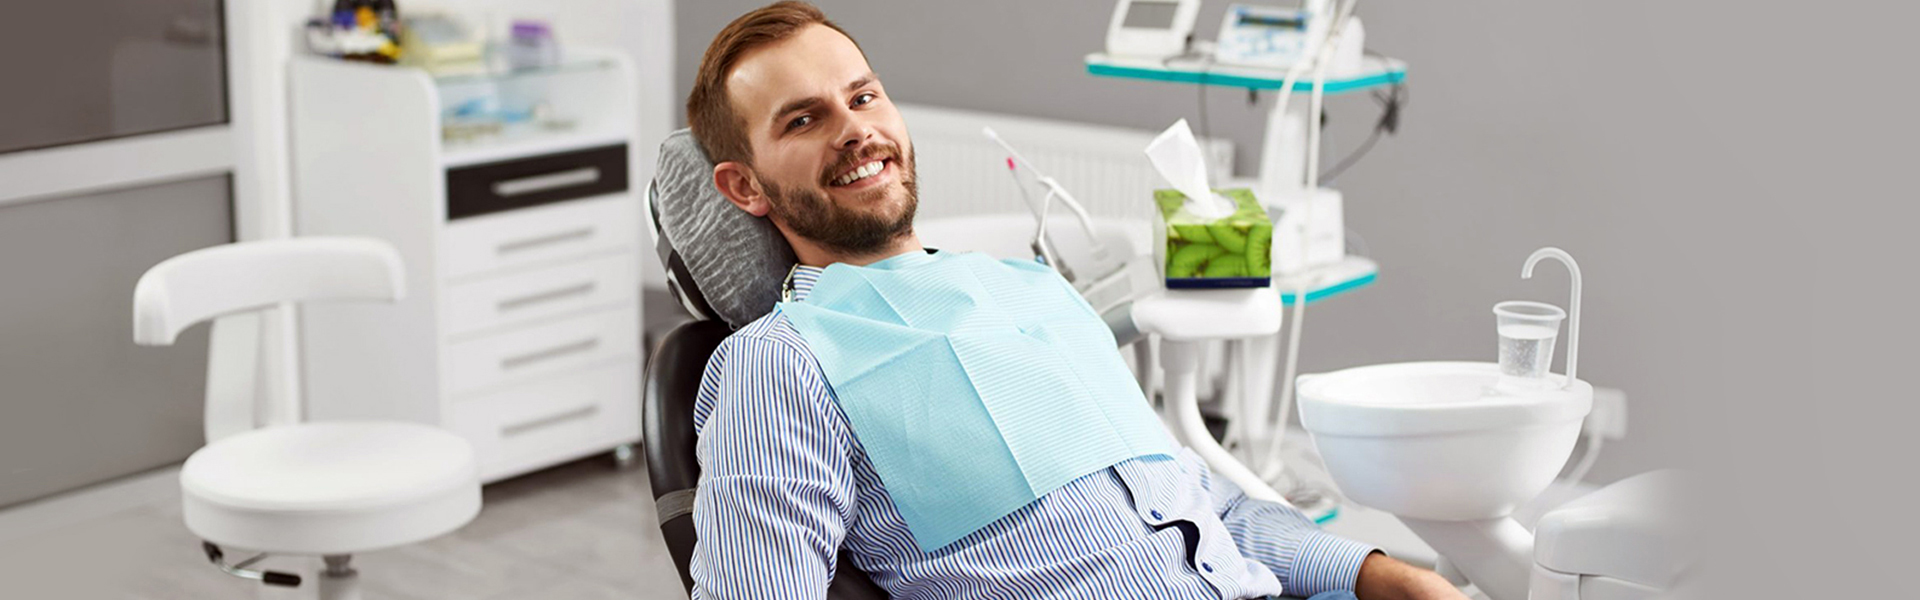 LANAP® Dental Procedure Is a Revolutionary Treatment for Periodontal Disease: Here’s Why